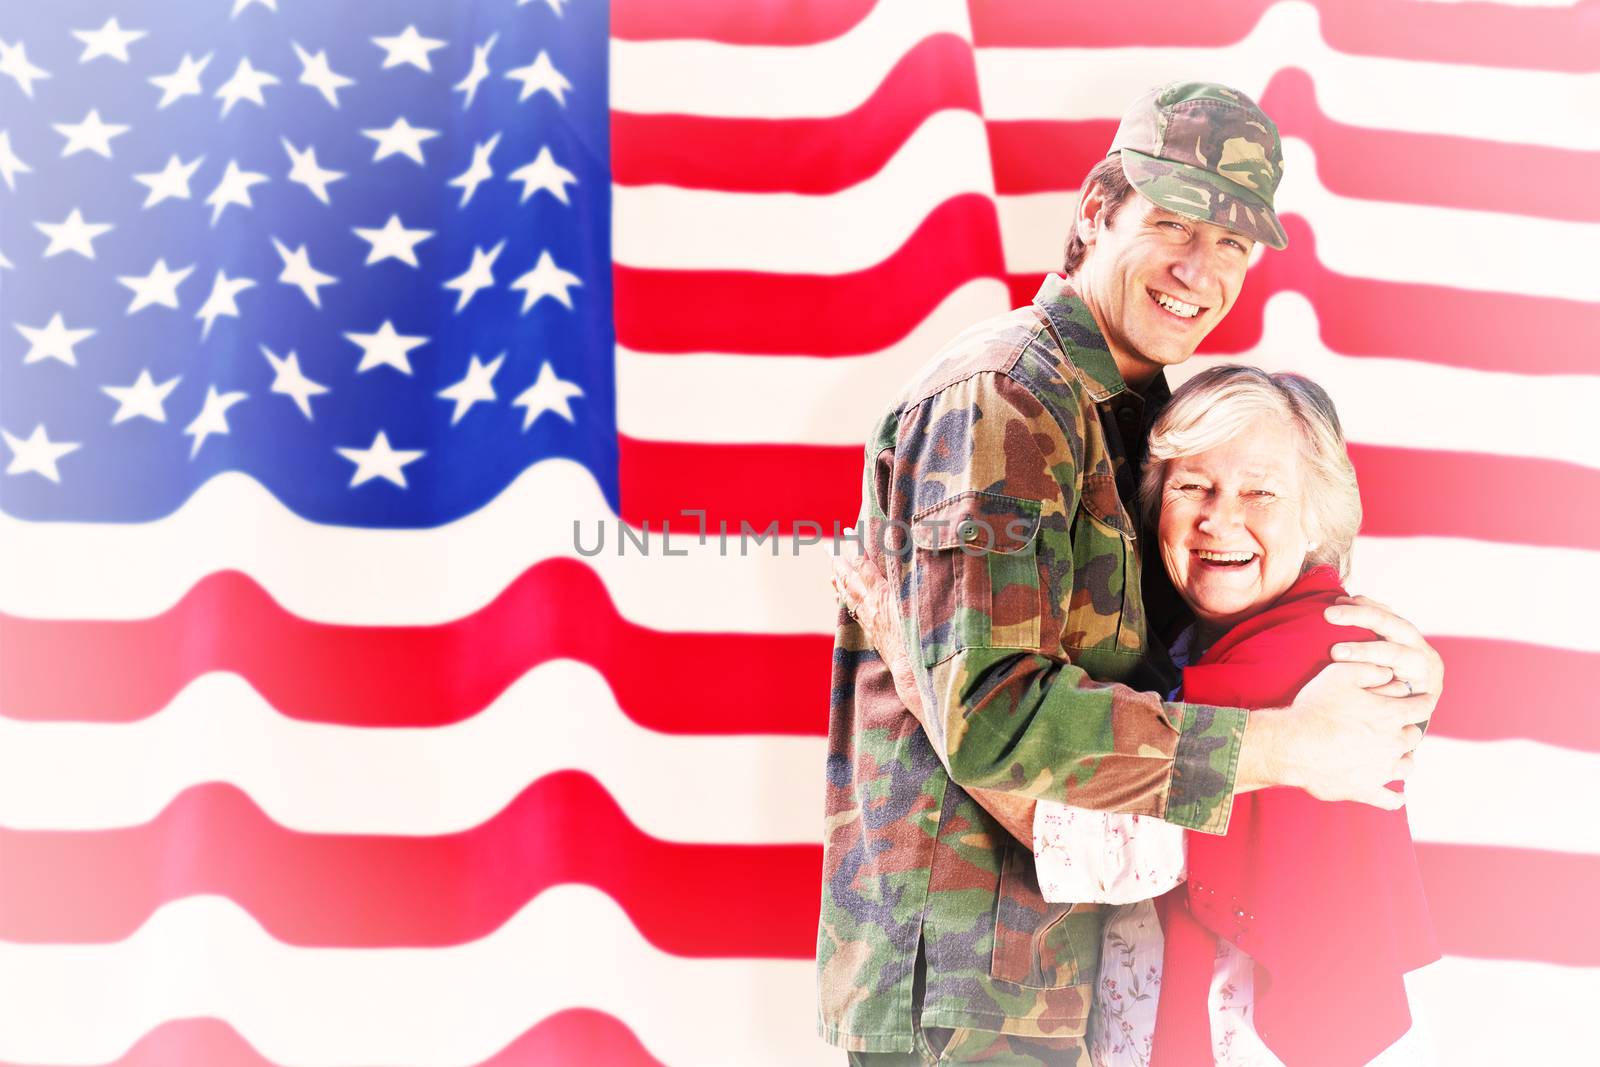 Solider reunited with mother against rippled us flag